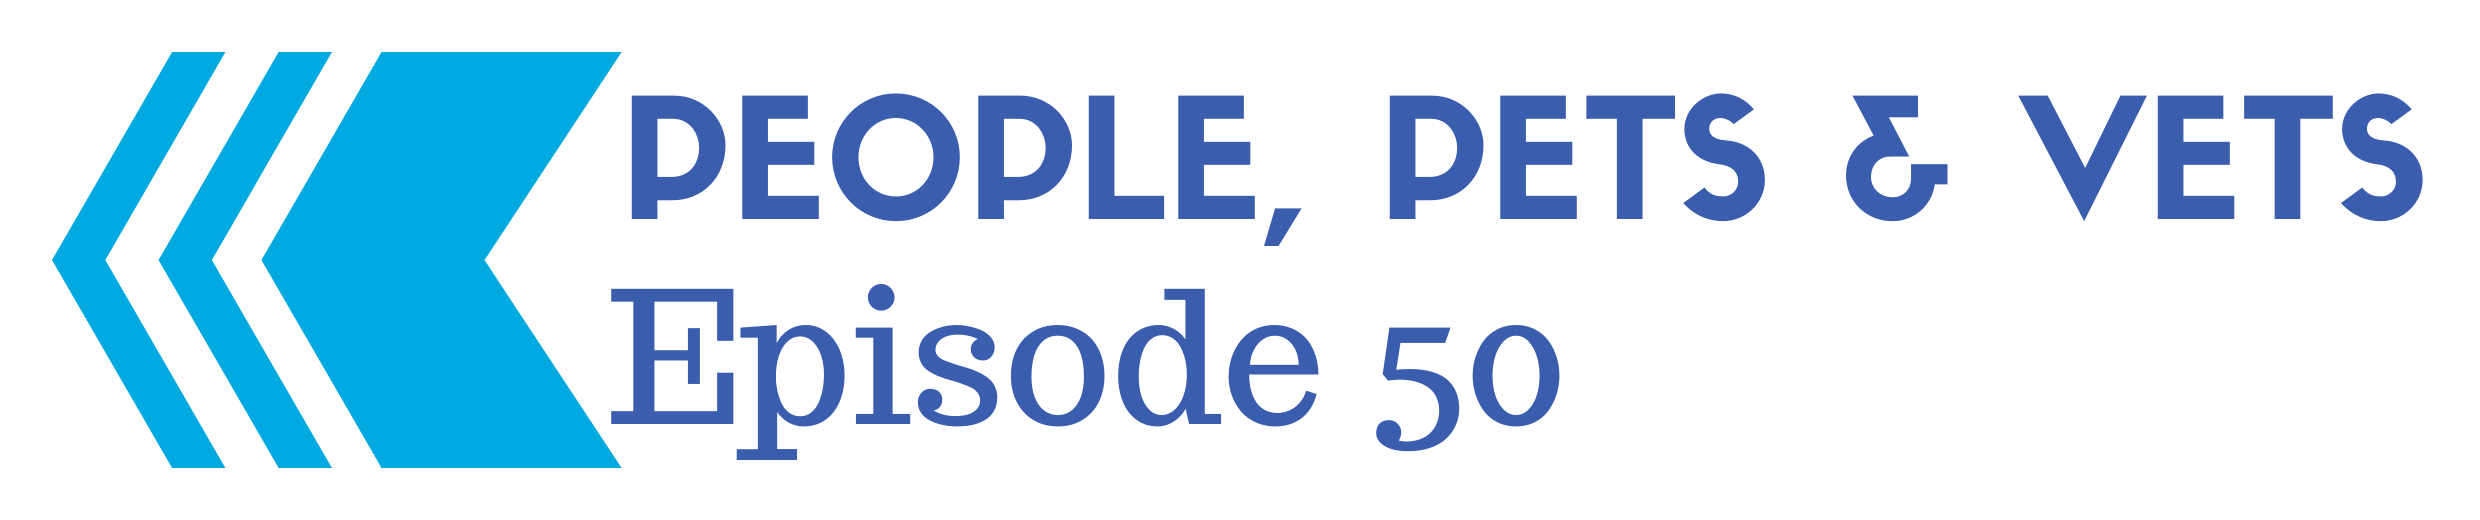 Back to Episode 51